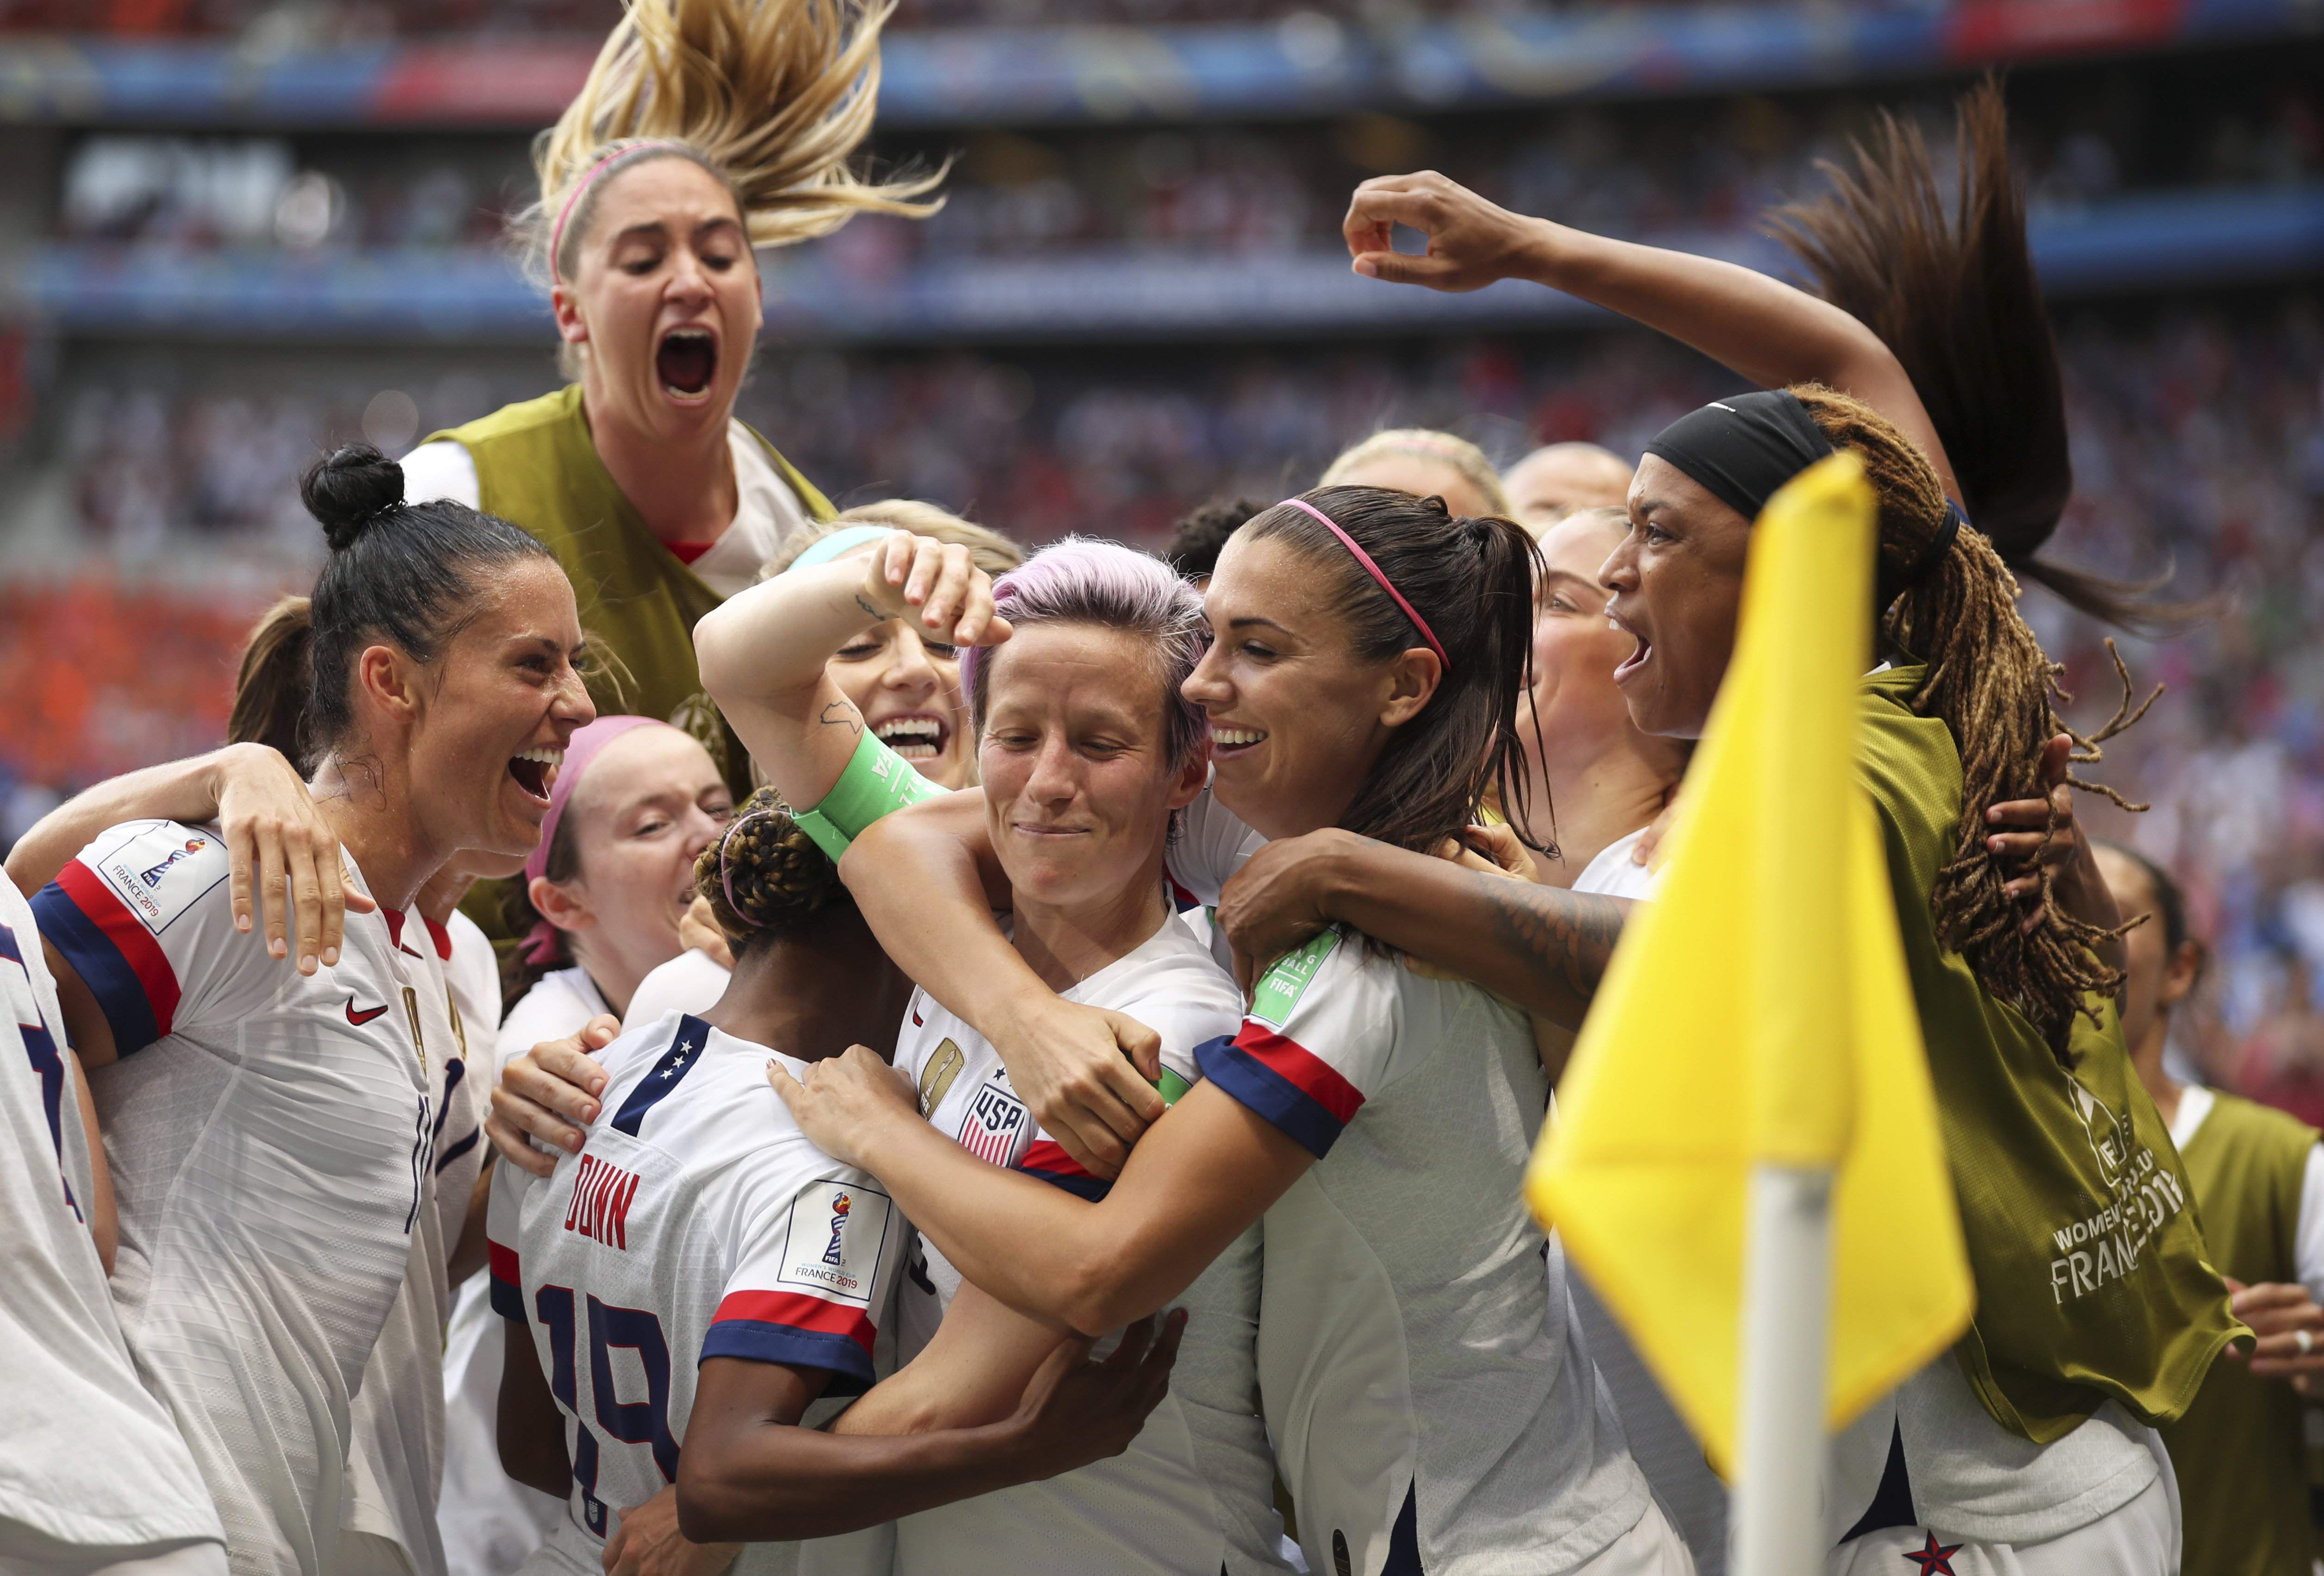 PolitiFact: Does the U.S. women's soccer team bring in more revenue but get paid less than the men?